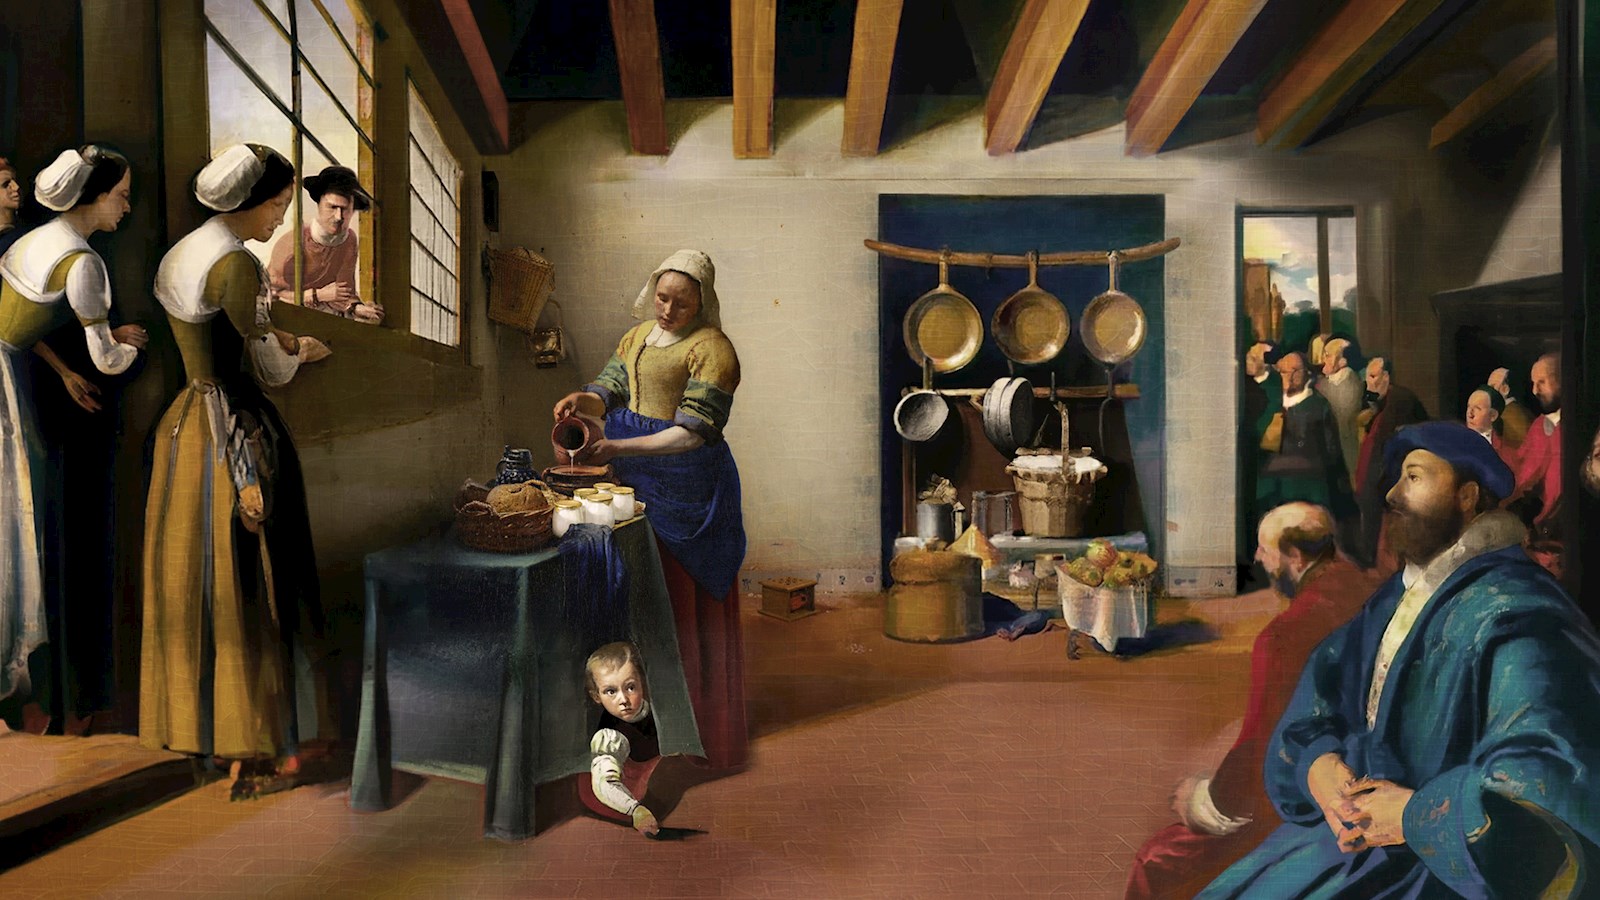 AI generated image the shows a scene beyond Vermeer's painting, the Milkmaid